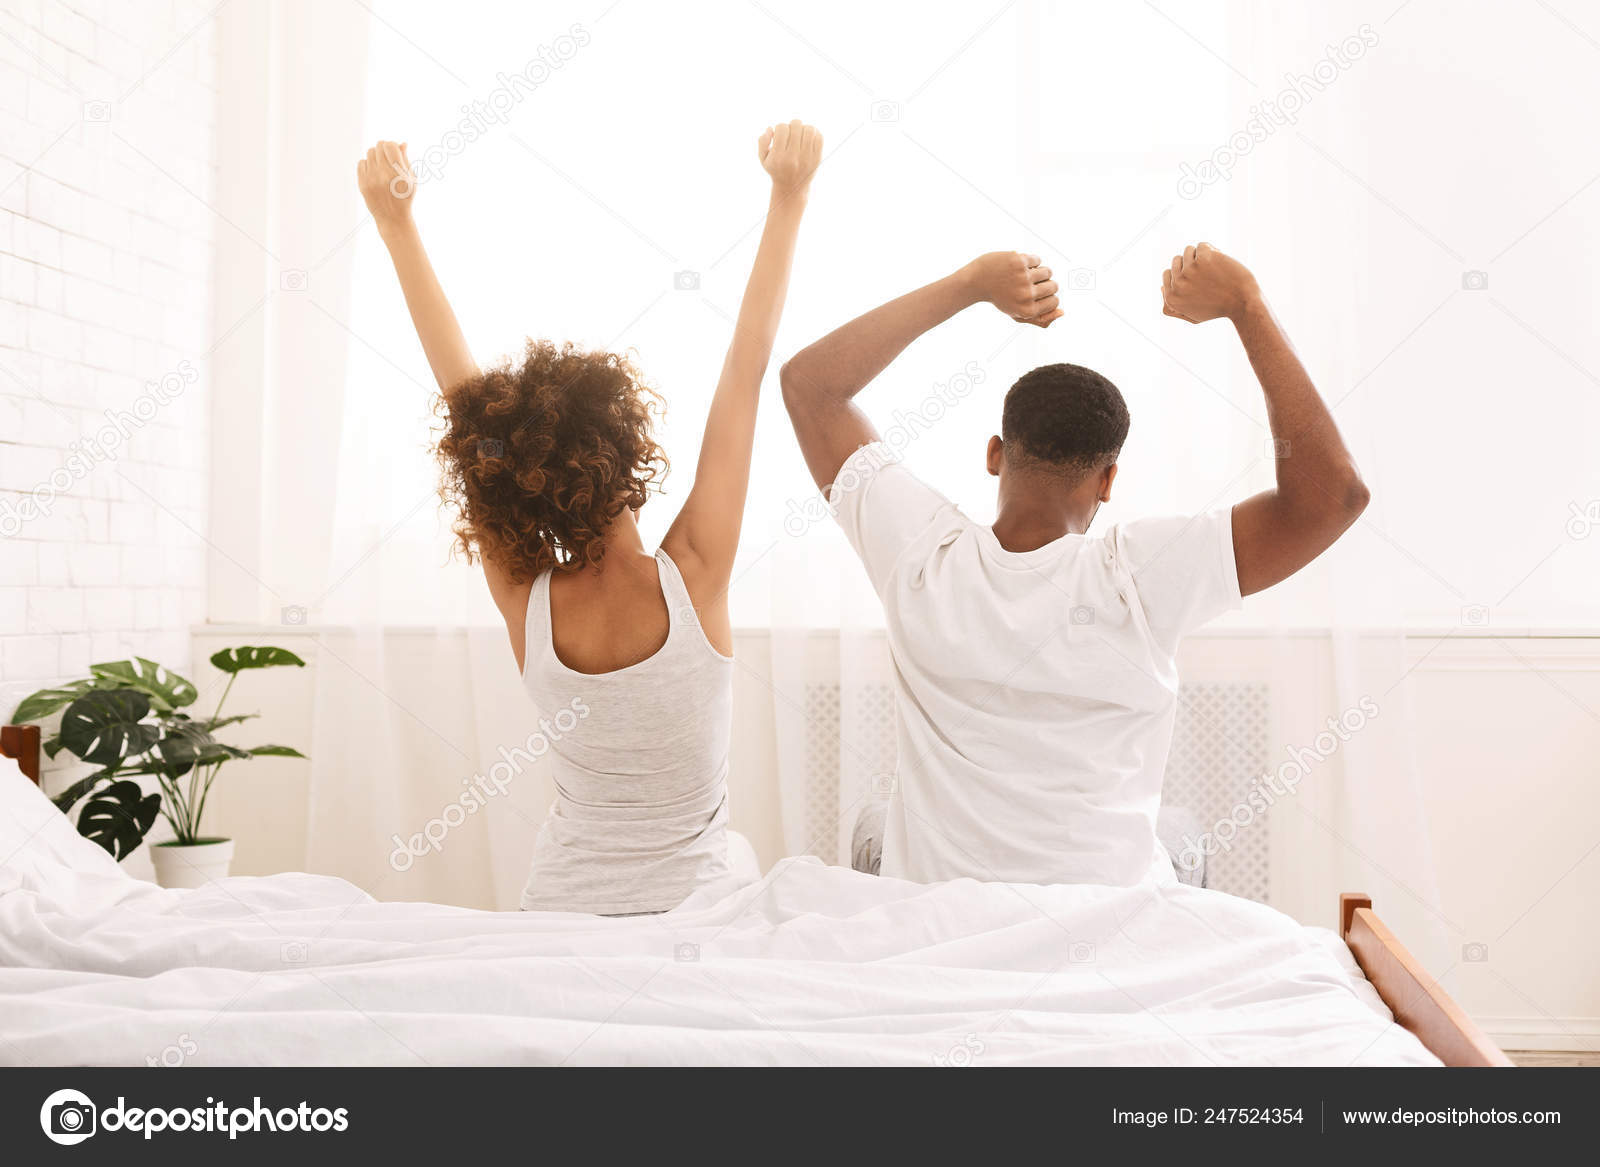 Funny Married Couple Stretching In Bedroom After Wakeup